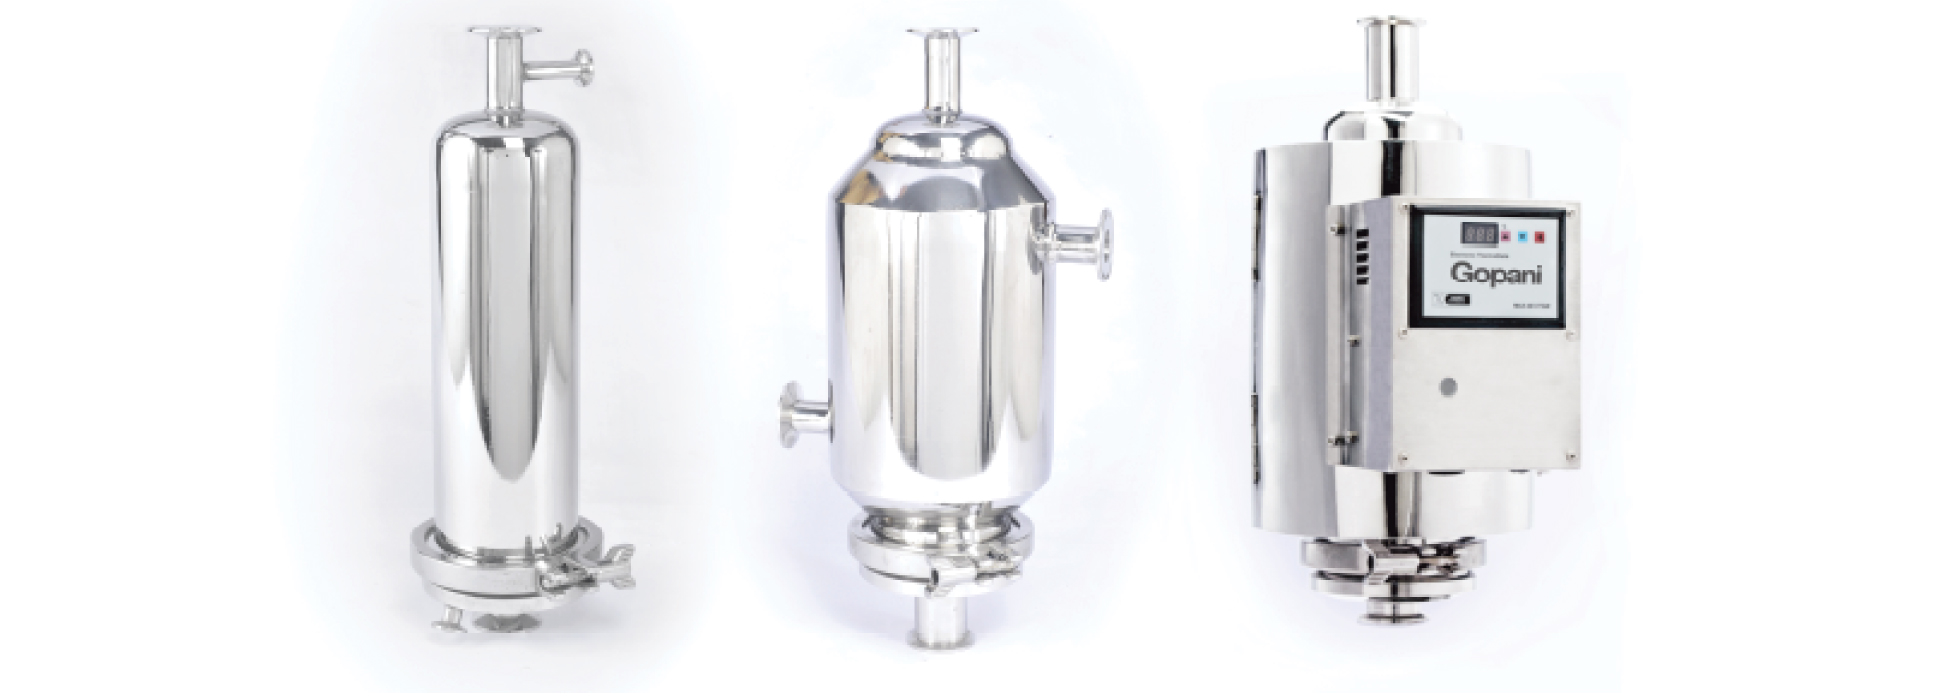 Vent Filter Housing - Gopani Product Systems